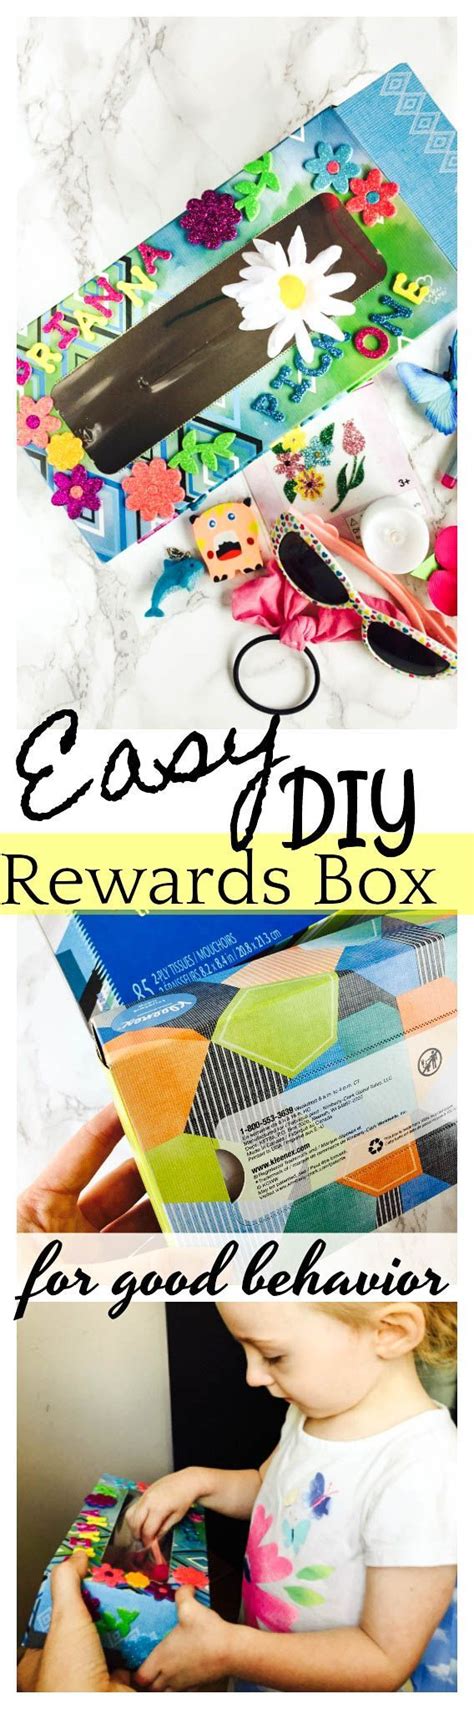 Check Out This Easy Hack For Making A Rewards Box That Kids Will Love